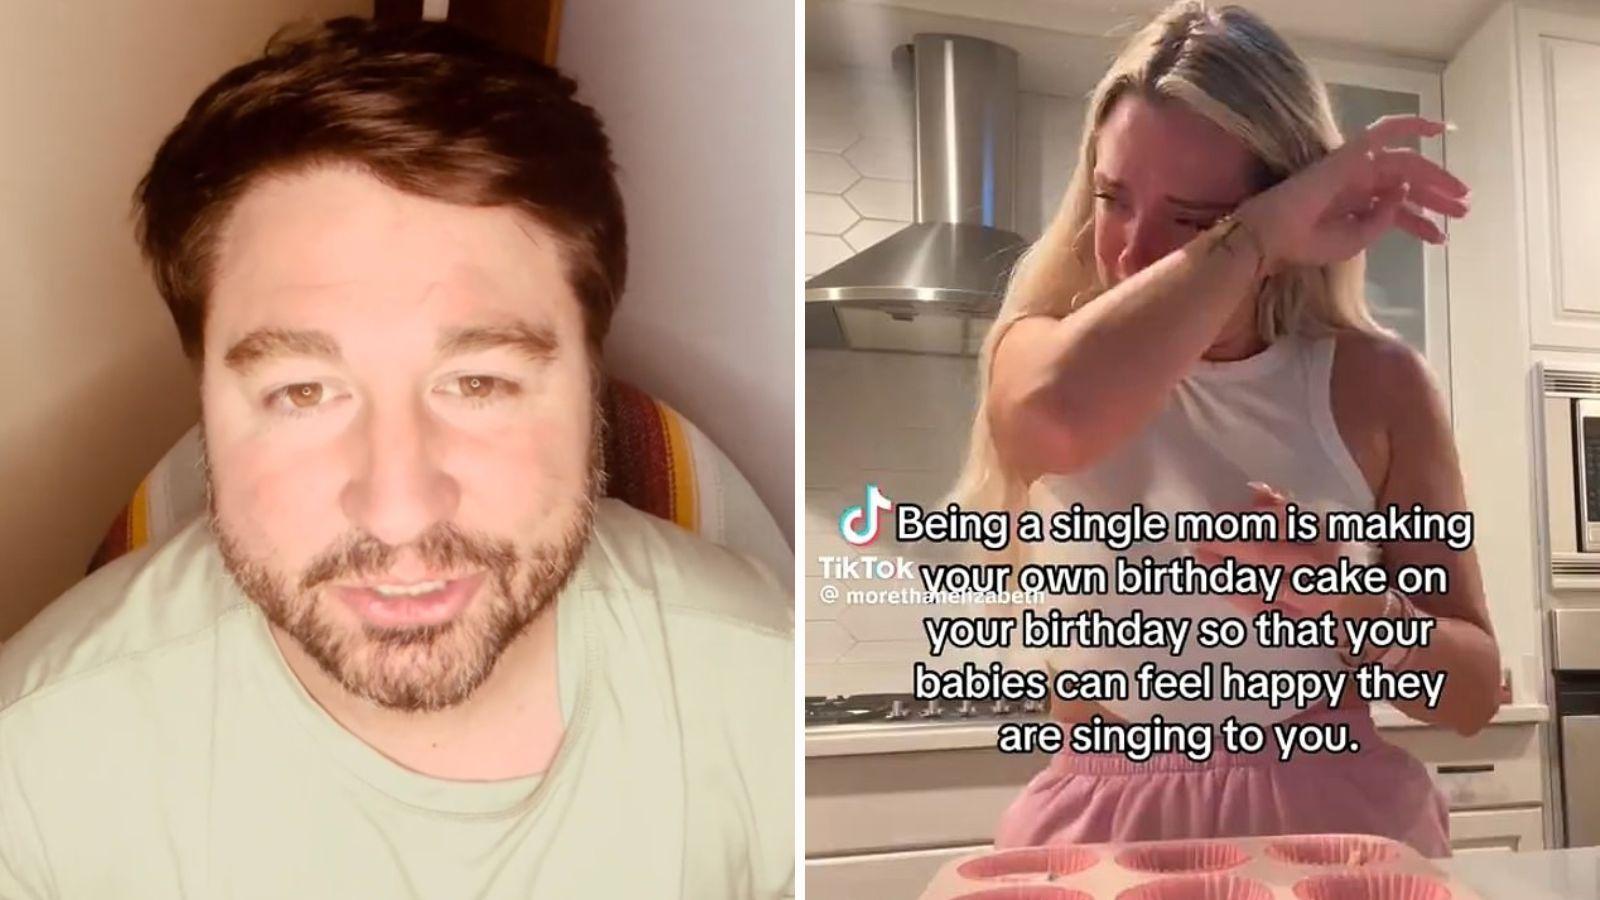 Ex-husbands responds to single mom making her own birthday cake